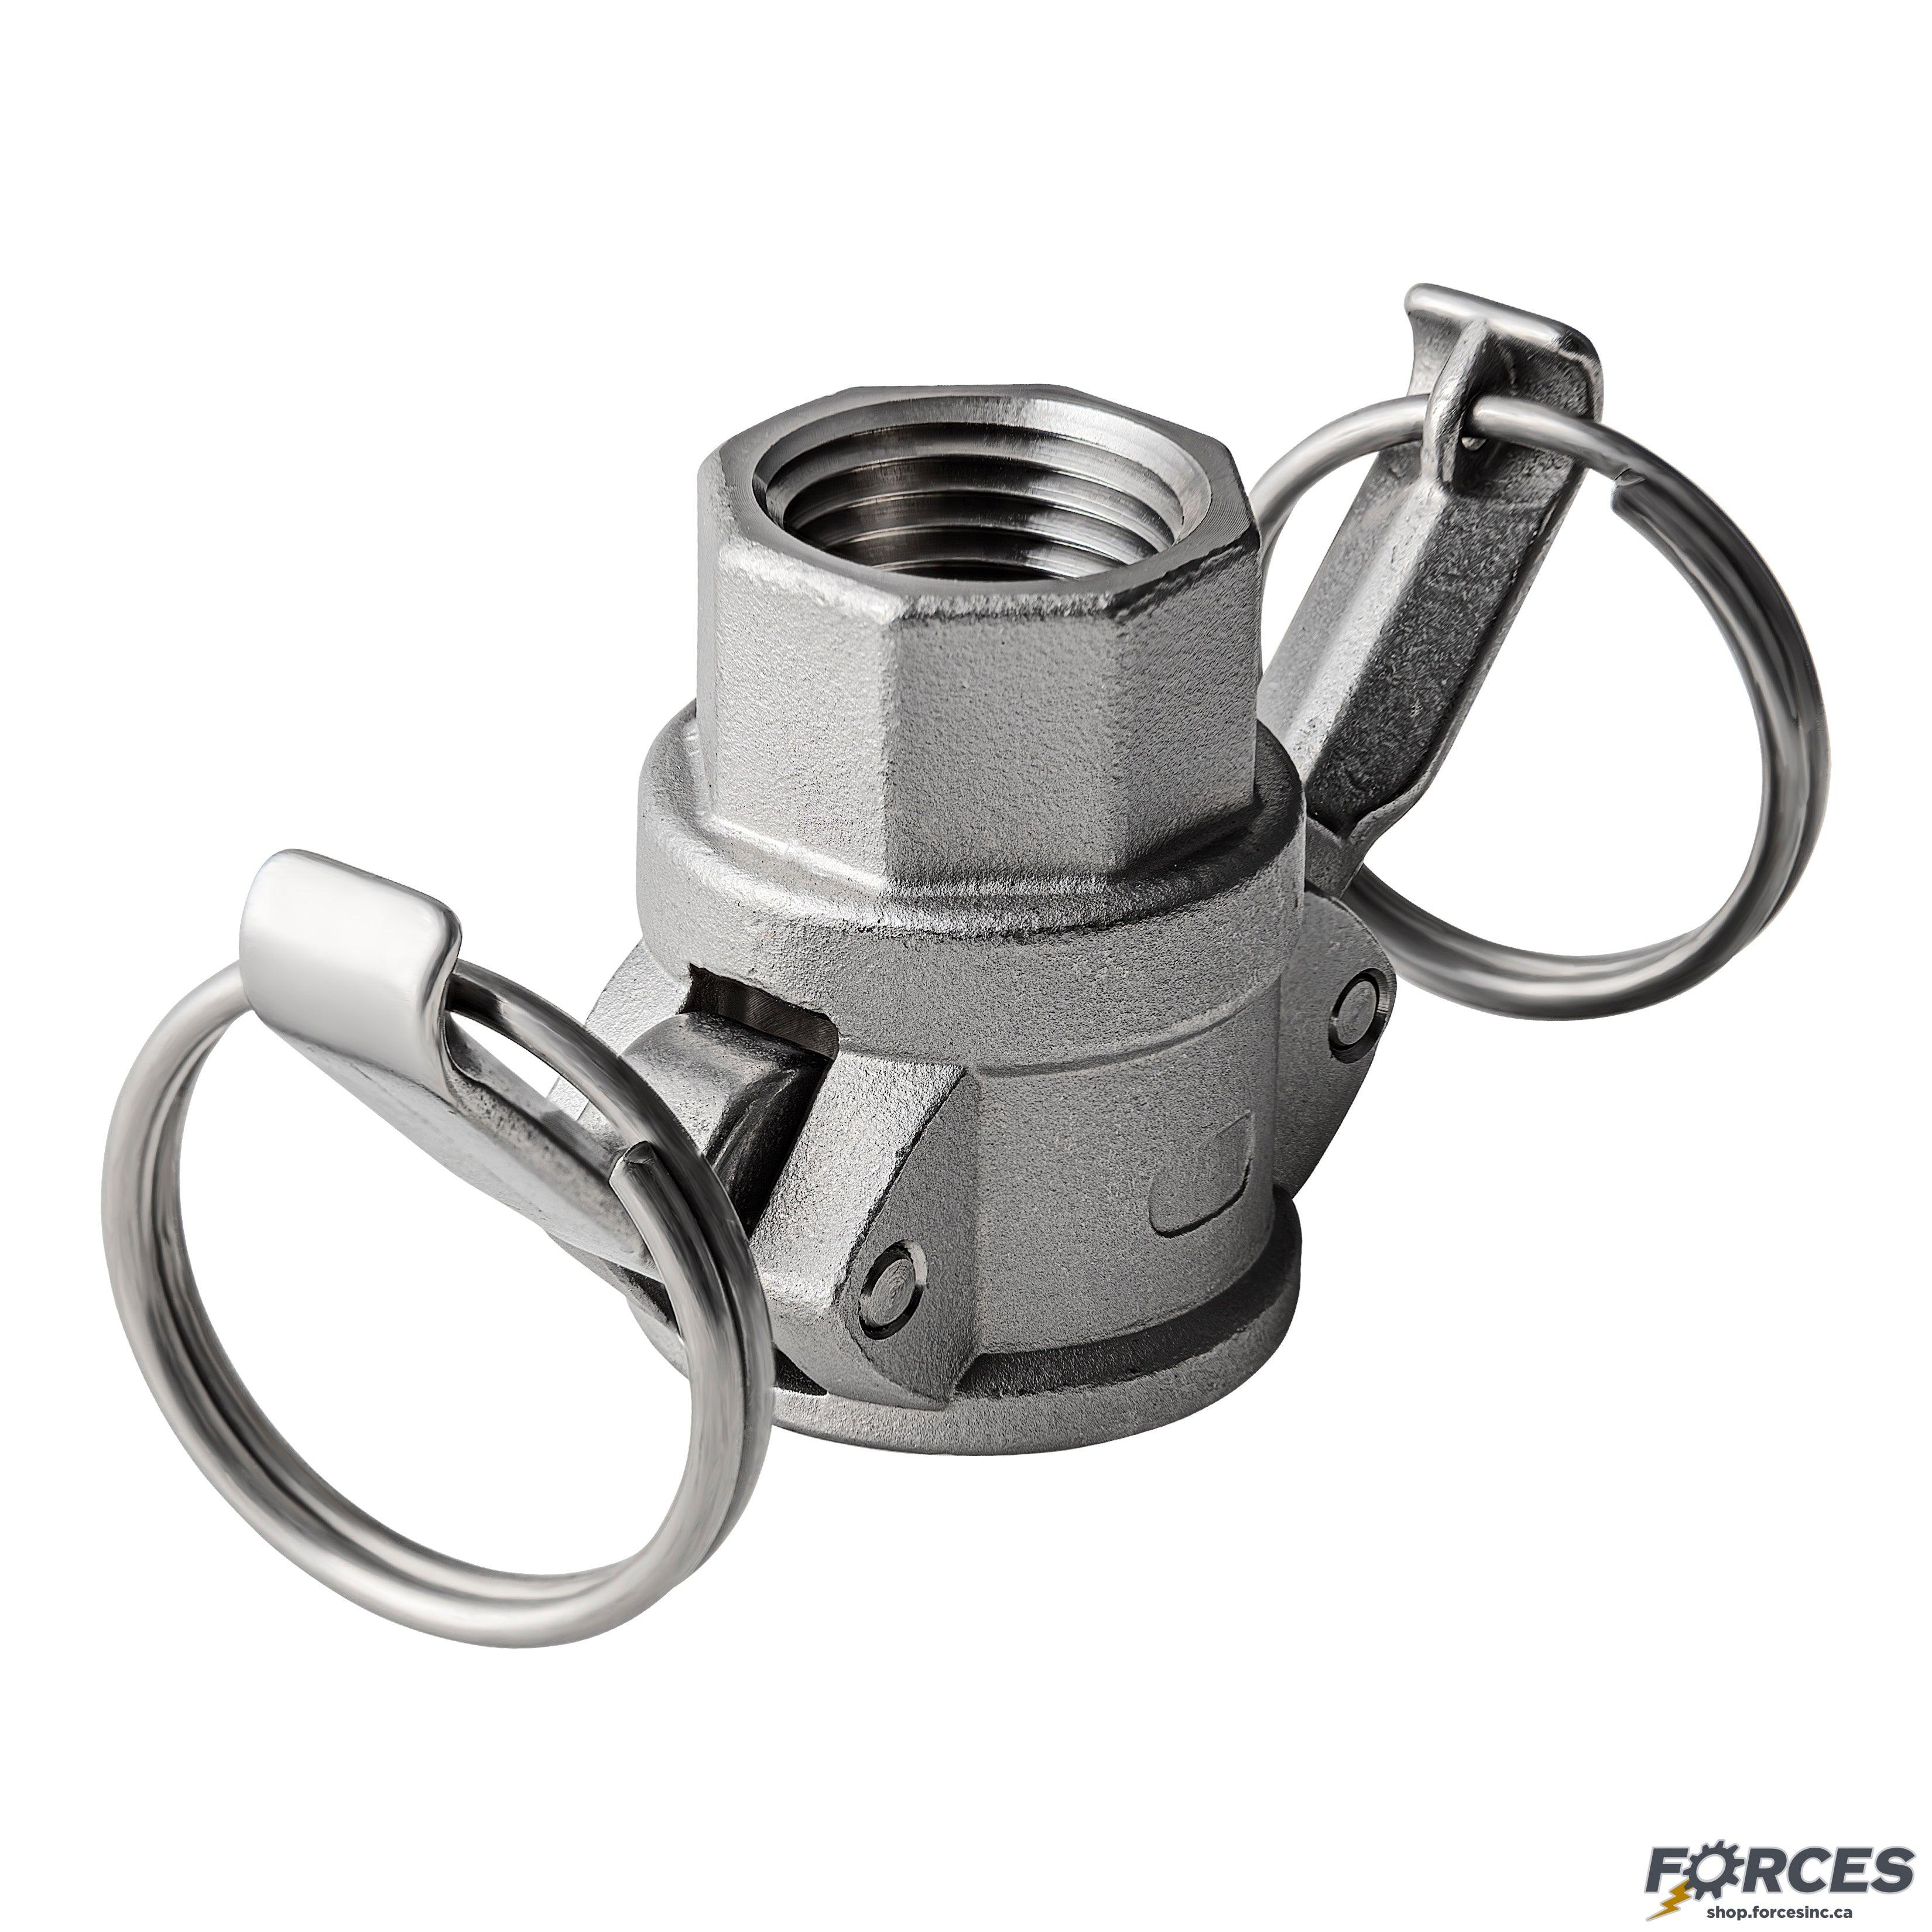 1-1/4" Type D Camlock Fitting Stainless Steel 316 - Forces Inc